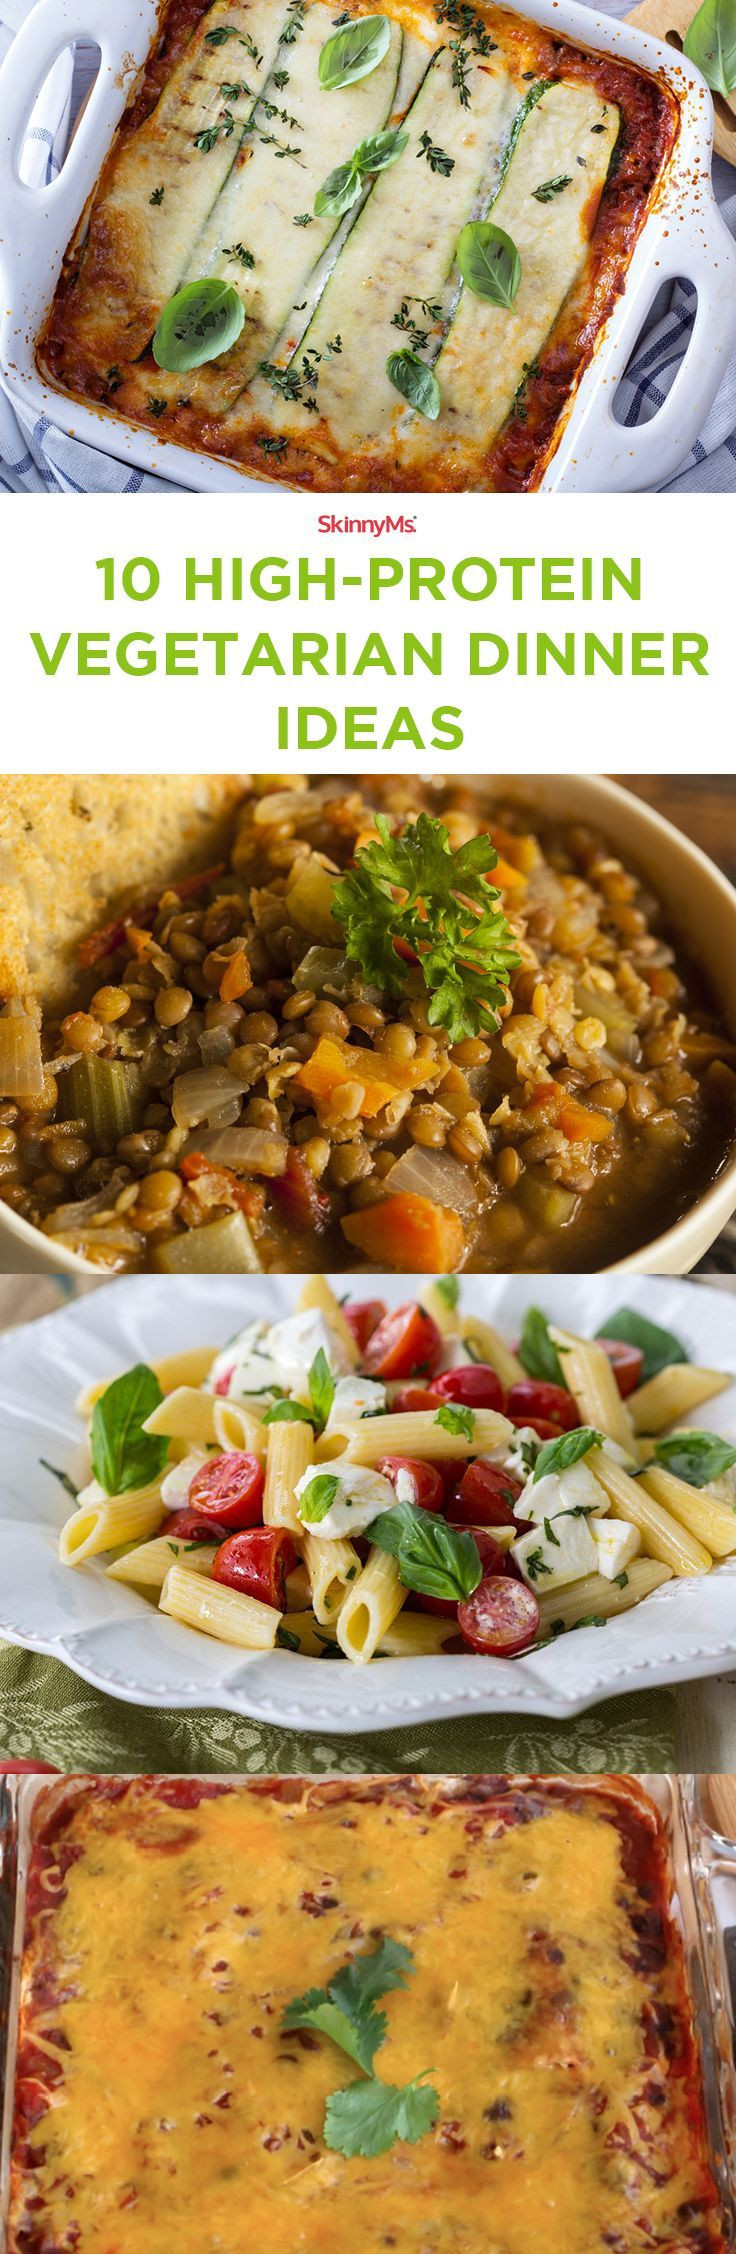 Vegetarian Dinners With Protein
 Best 25 High protein ve arian foods ideas on Pinterest